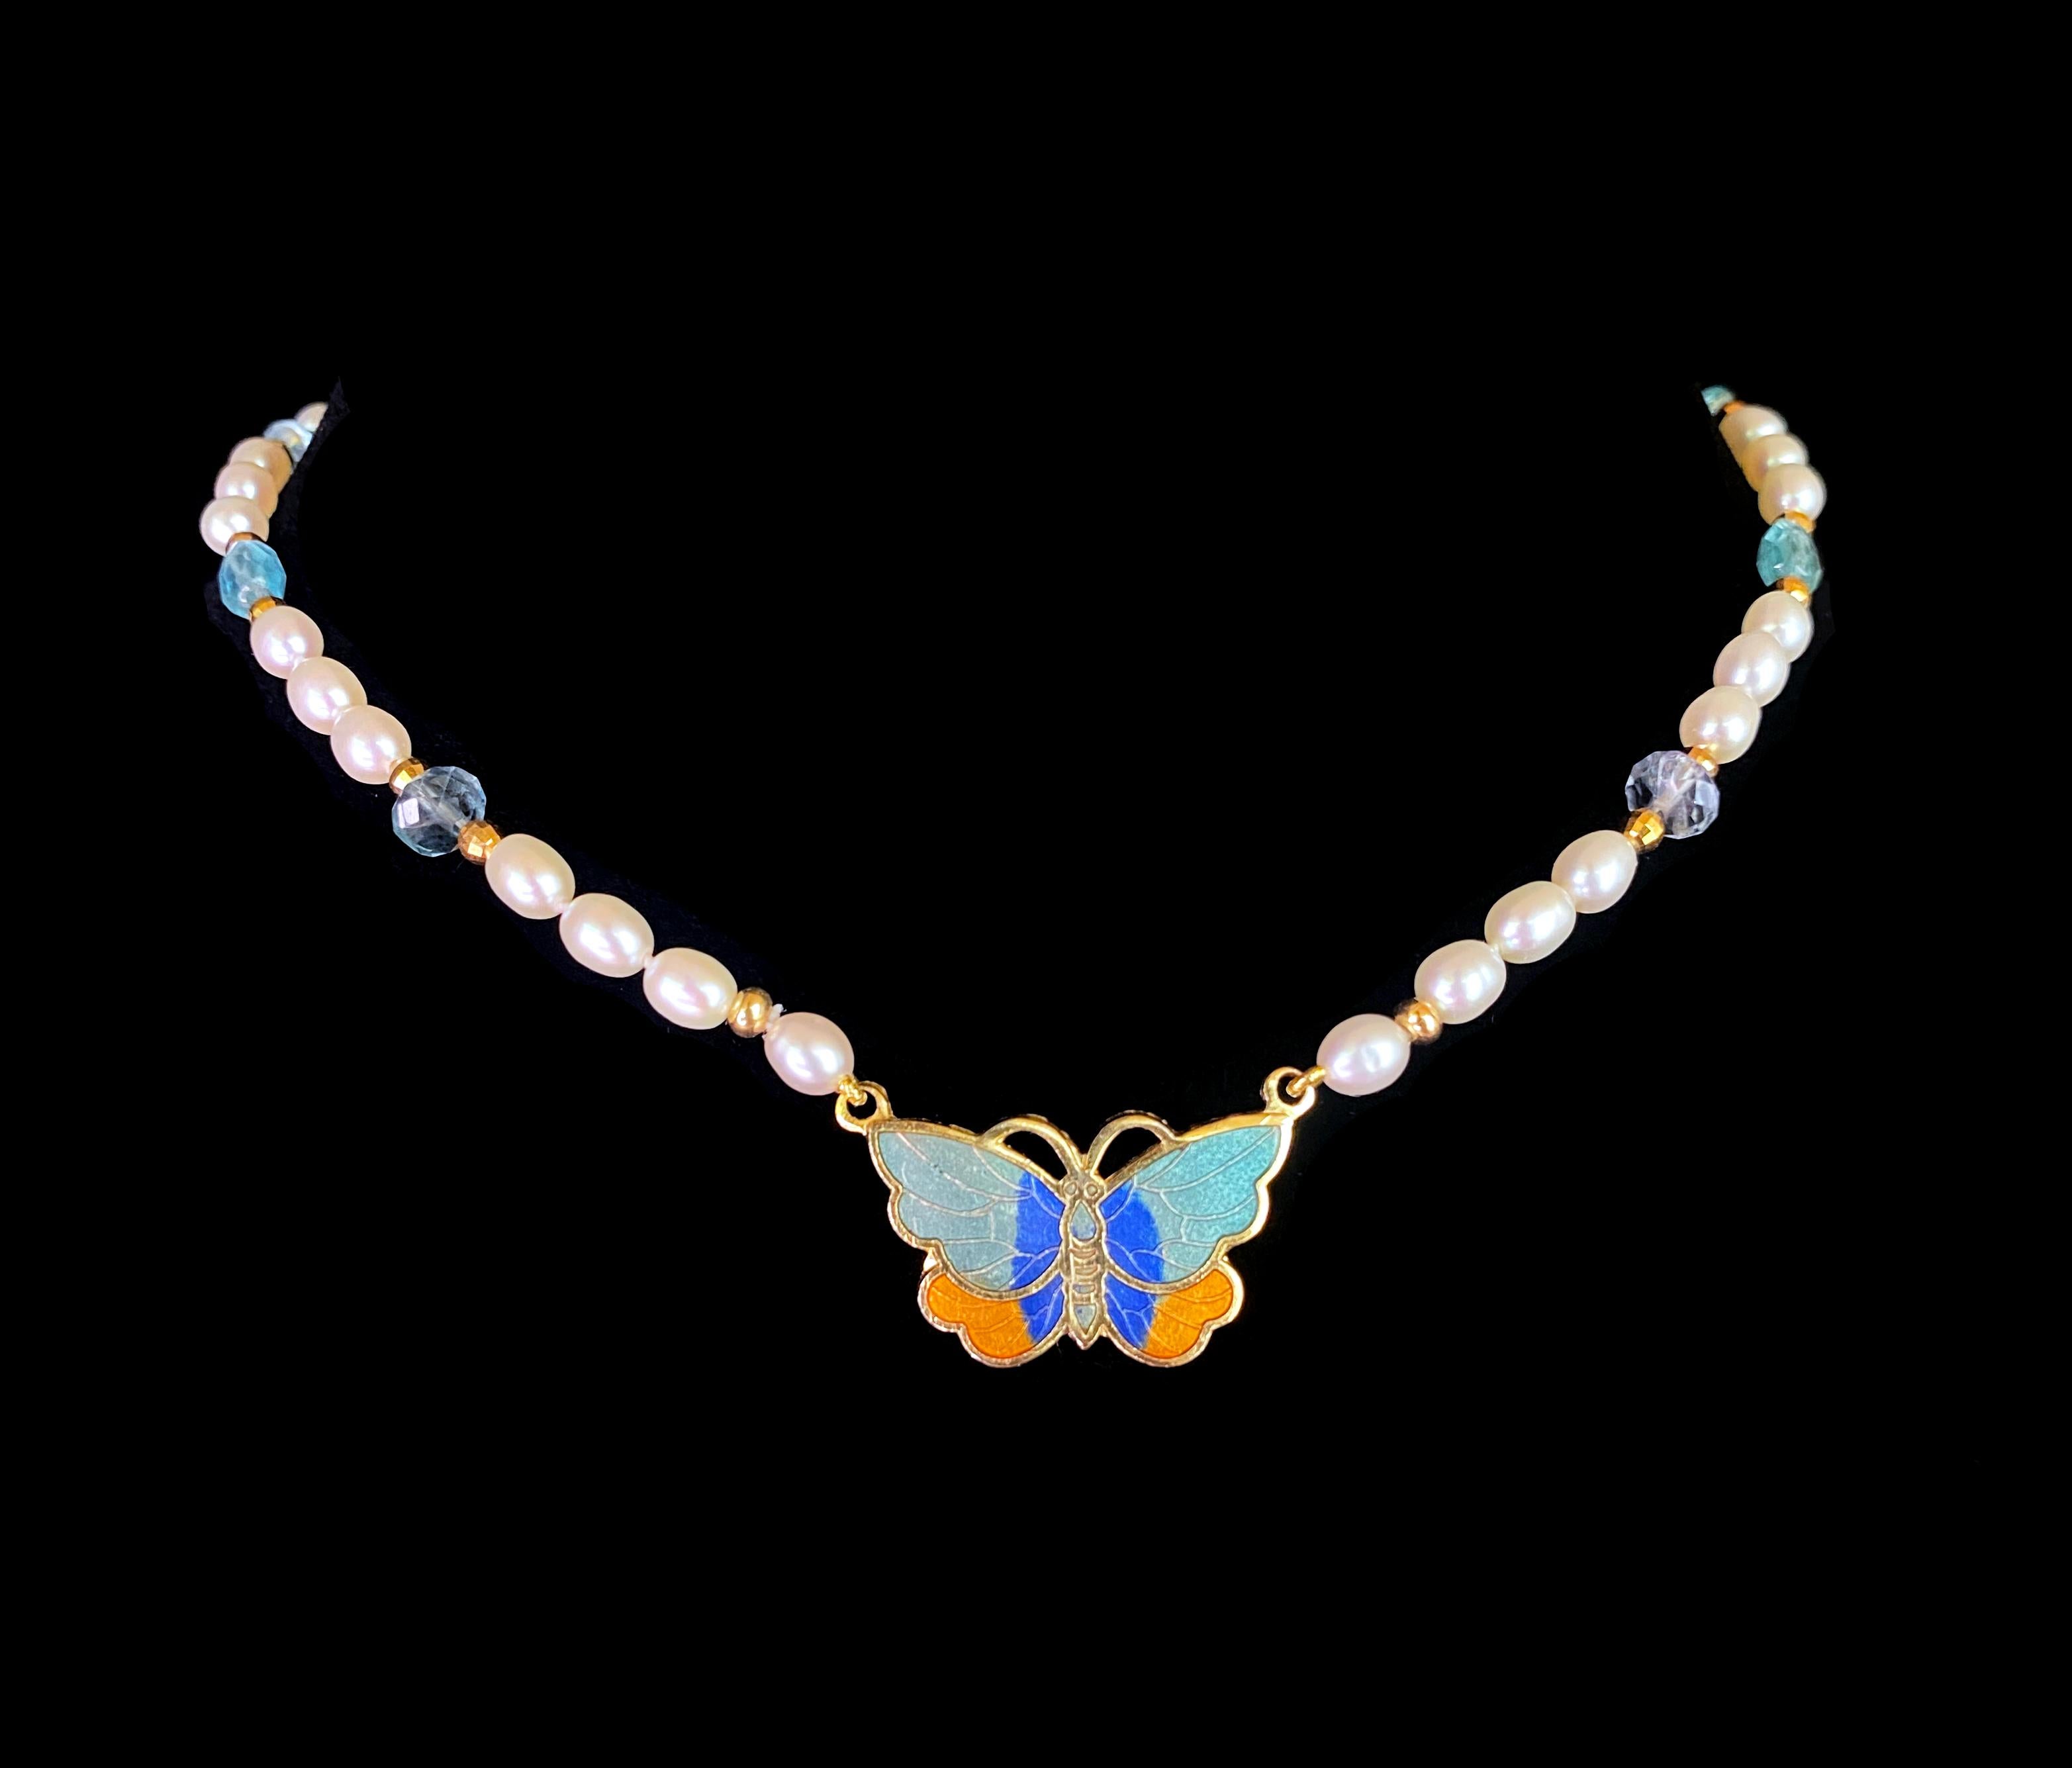 Artisan Marina J For Girls Pearl Necklace with Aquamarine & 18k Enameled Butterfly For Sale